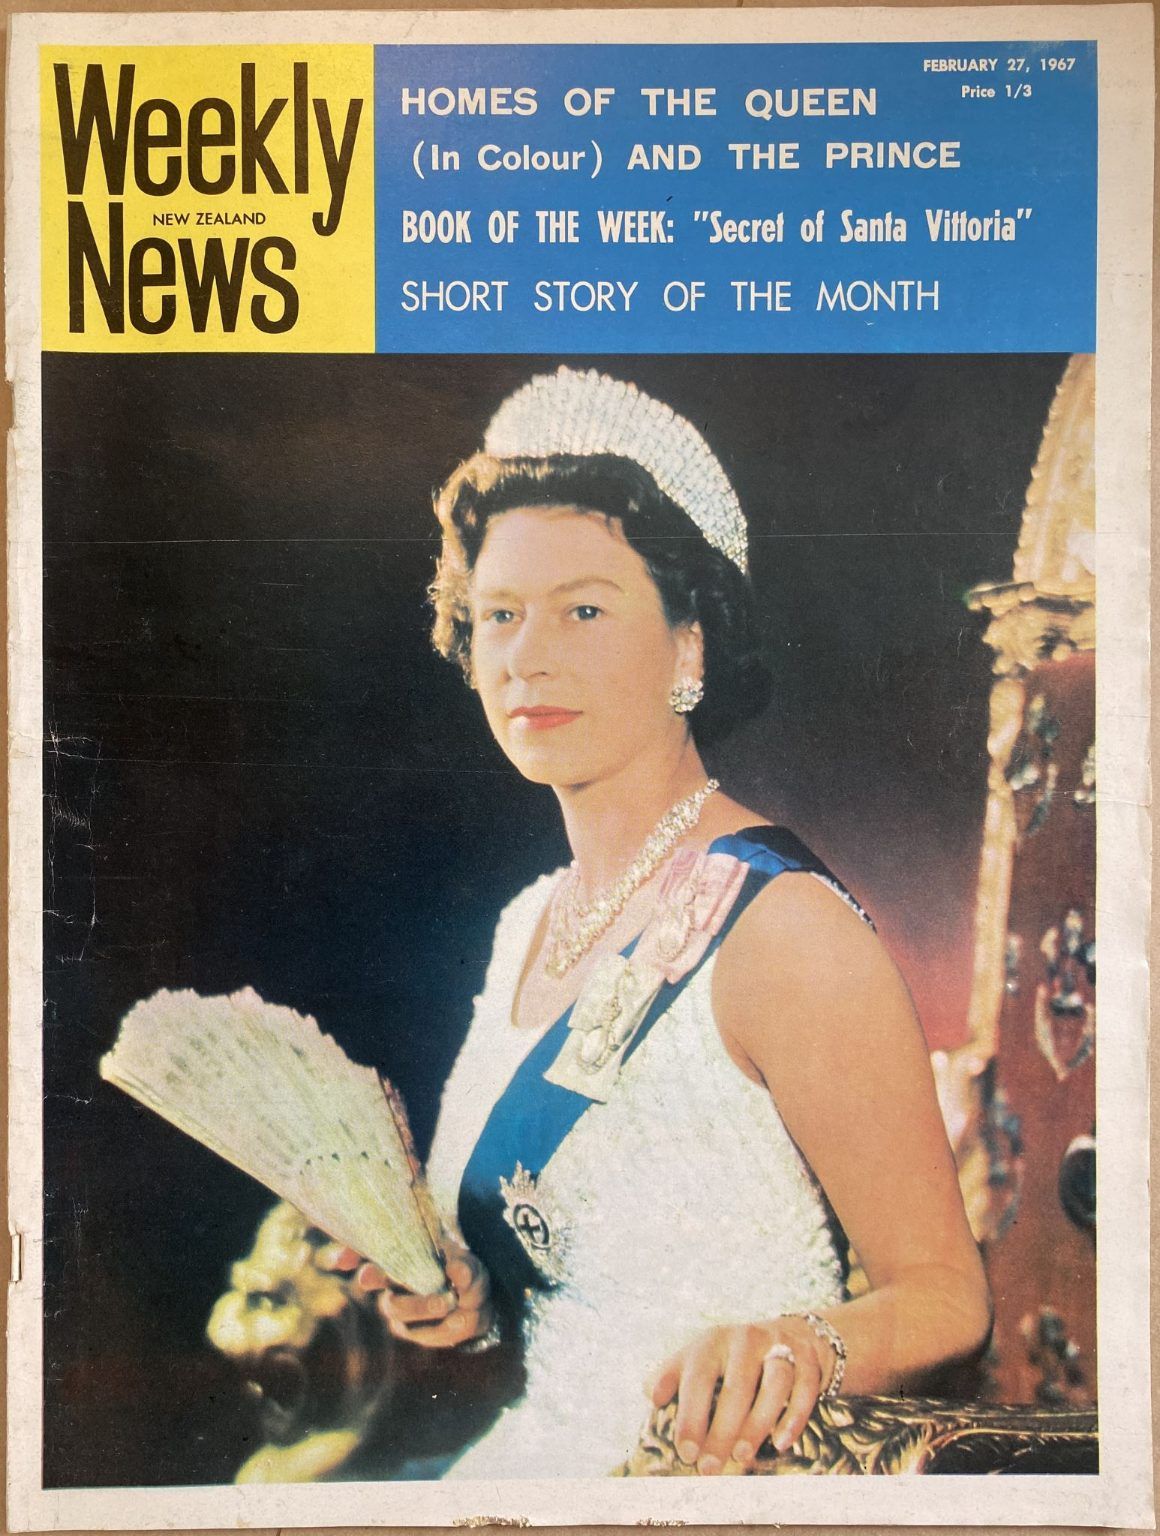 OLD NEWSPAPER: New Zealand Weekly News, No. 5387, 27 February 1967